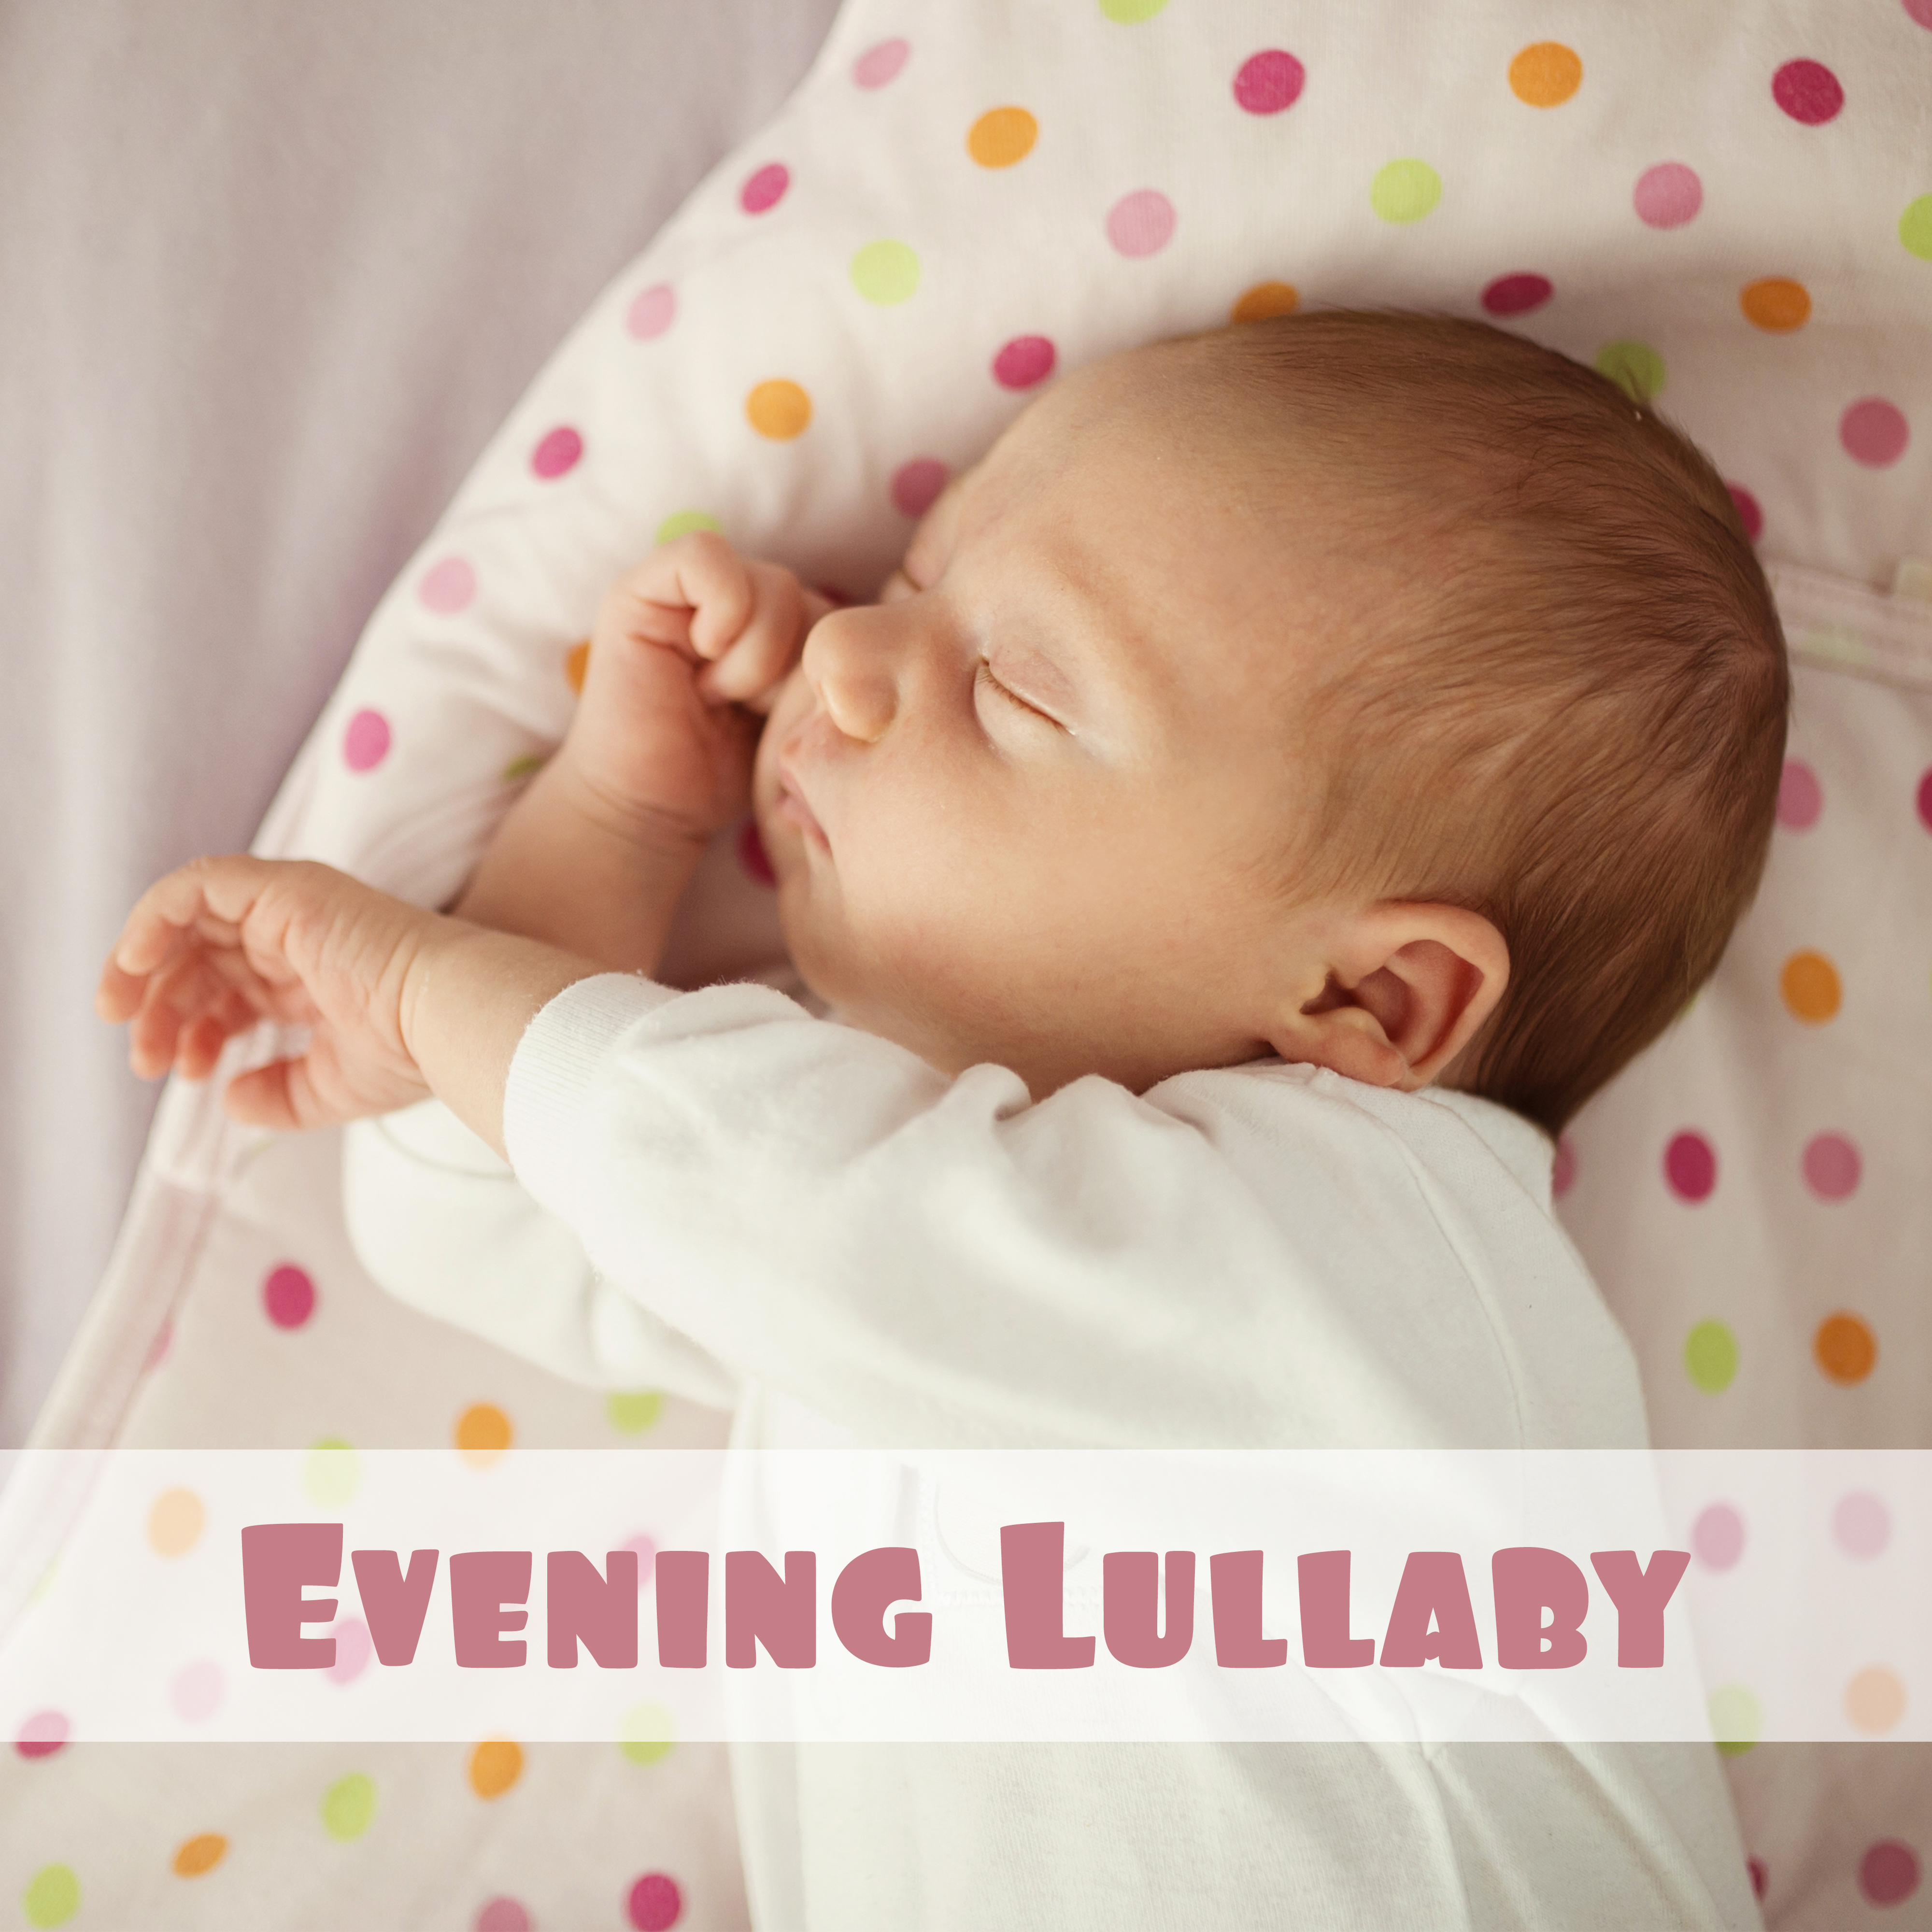 Evening Lullaby  Soft Music for Kids, Soothing Cradle Songs, Restful Sleep, Baby Music